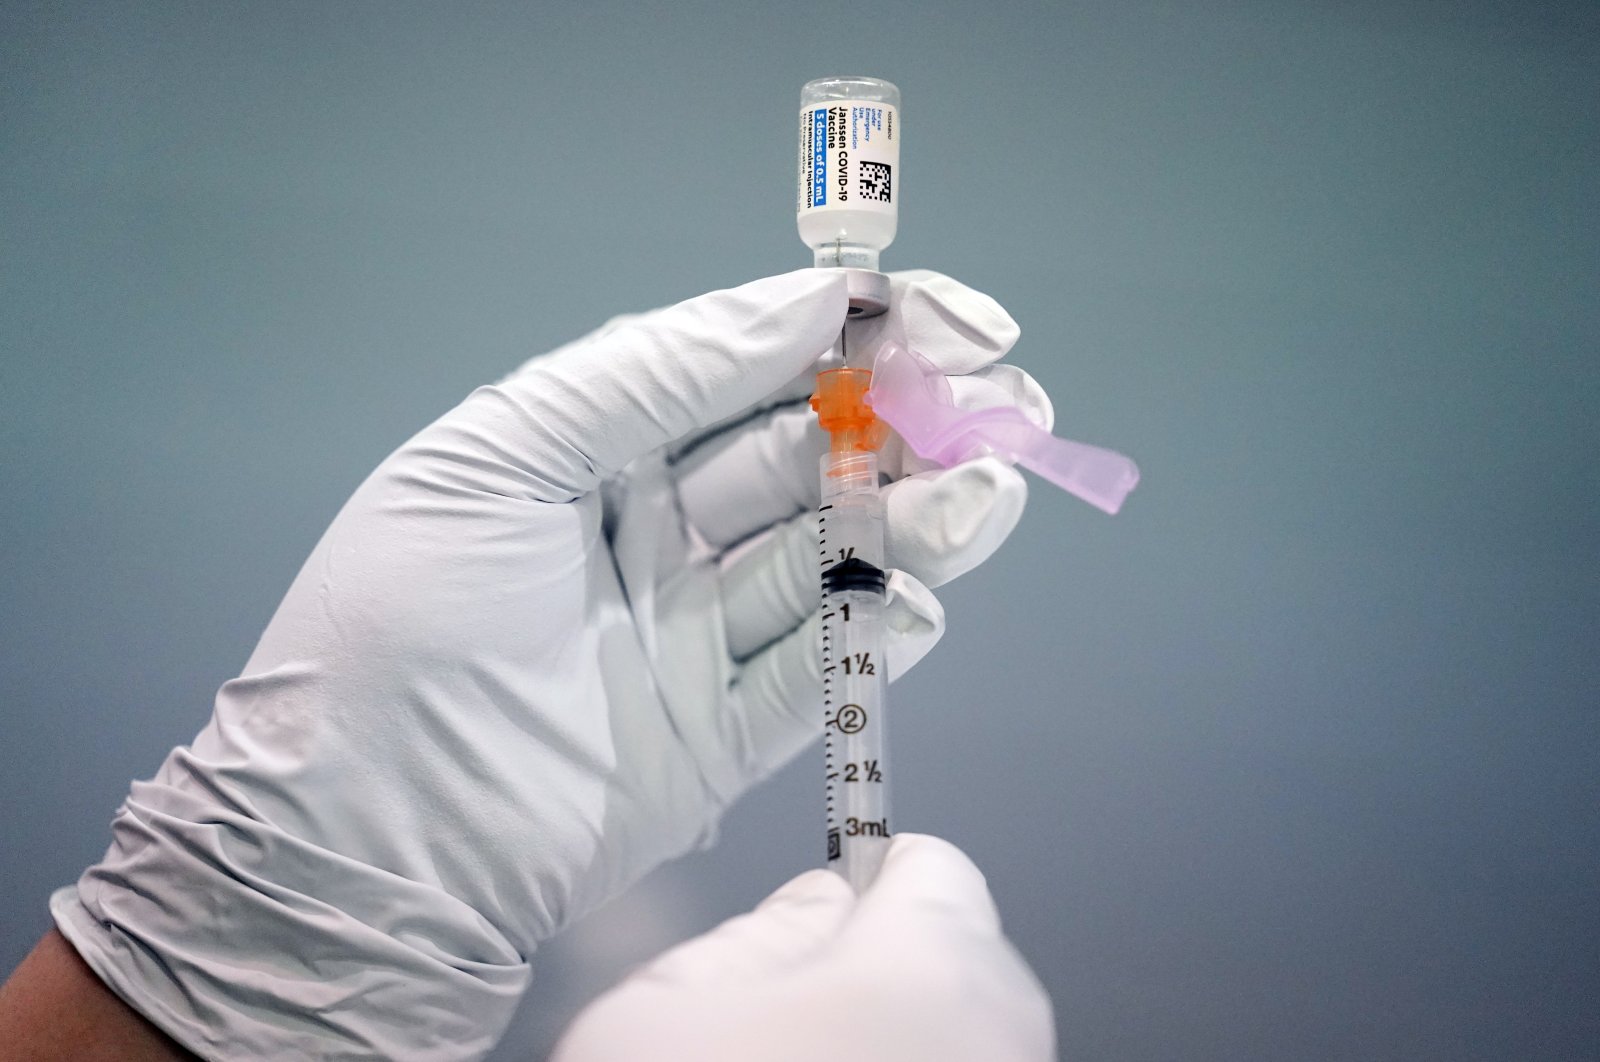 A member of the Philadelphia Fire Department prepares a dose of the Johnson & Johnson COVID-19 vaccine at a vaccination site setup at a Salvation Army location in Philadelphia, March 26, 2021. (AP Photo)